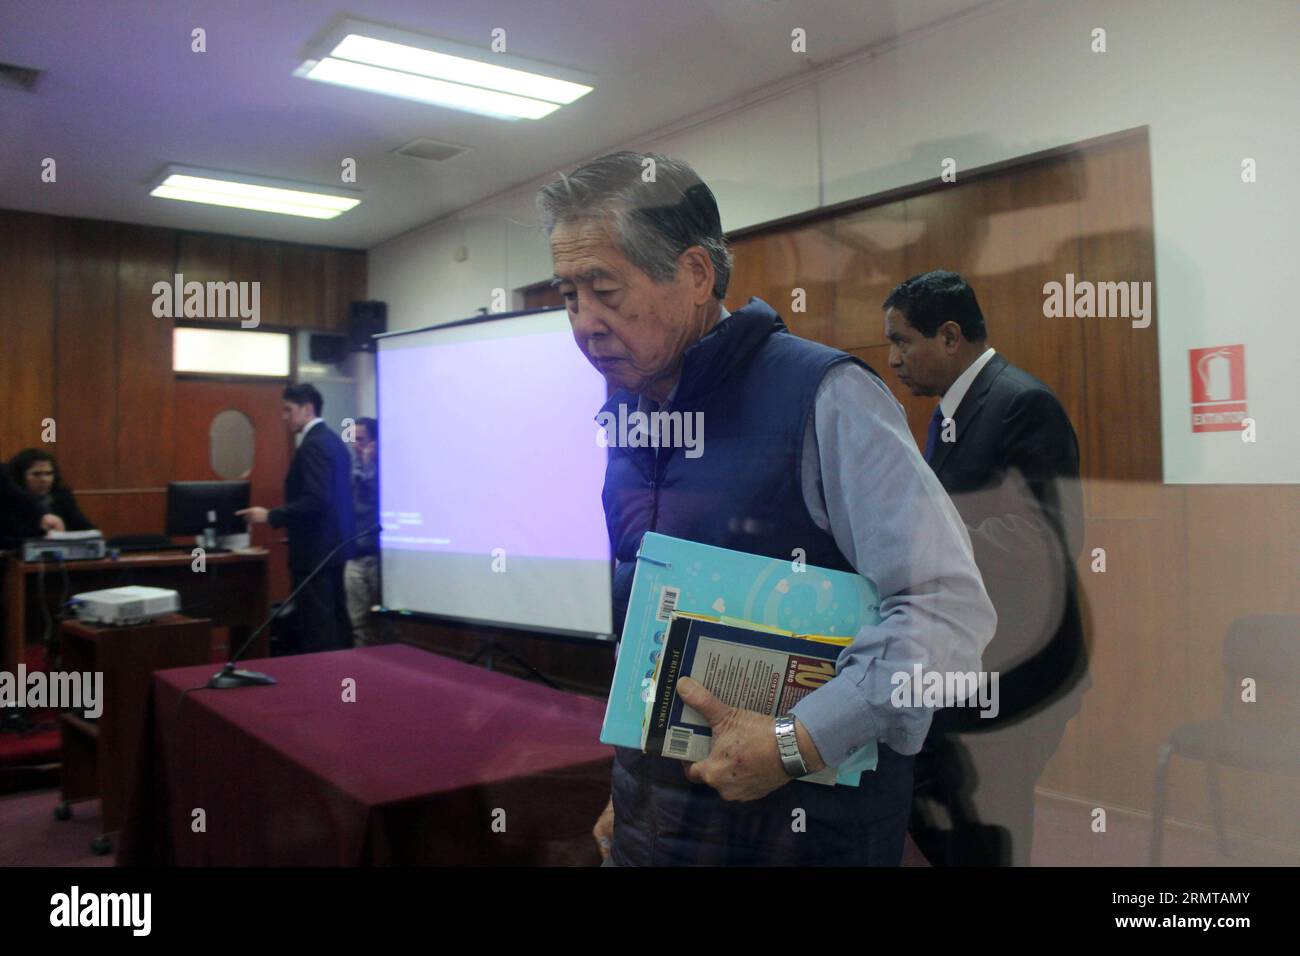 Former Peruvian President Alberto Fujimori (2nd R) attends his trial on the Chicha Newspapers case, at the Direction of Special Operations of National Police (DINOES, for its acronym in Spanish), in Lima City, capital of Peru, on Aug. 25, 2014. The hearing of Fujimori s trial on the buying of notes of different newspapers with the State money, known as Chicha Newspapers case, was held at the Fourth Liquidator Penal Hall of Lima s Higher Court of Justice, according to local press. Luis Camacho) (lyi) PERU-LIMA-JUSTICE-FUJIMORI e LuisxCamacho PUBLICATIONxNOTxINxCHN Stock Photo